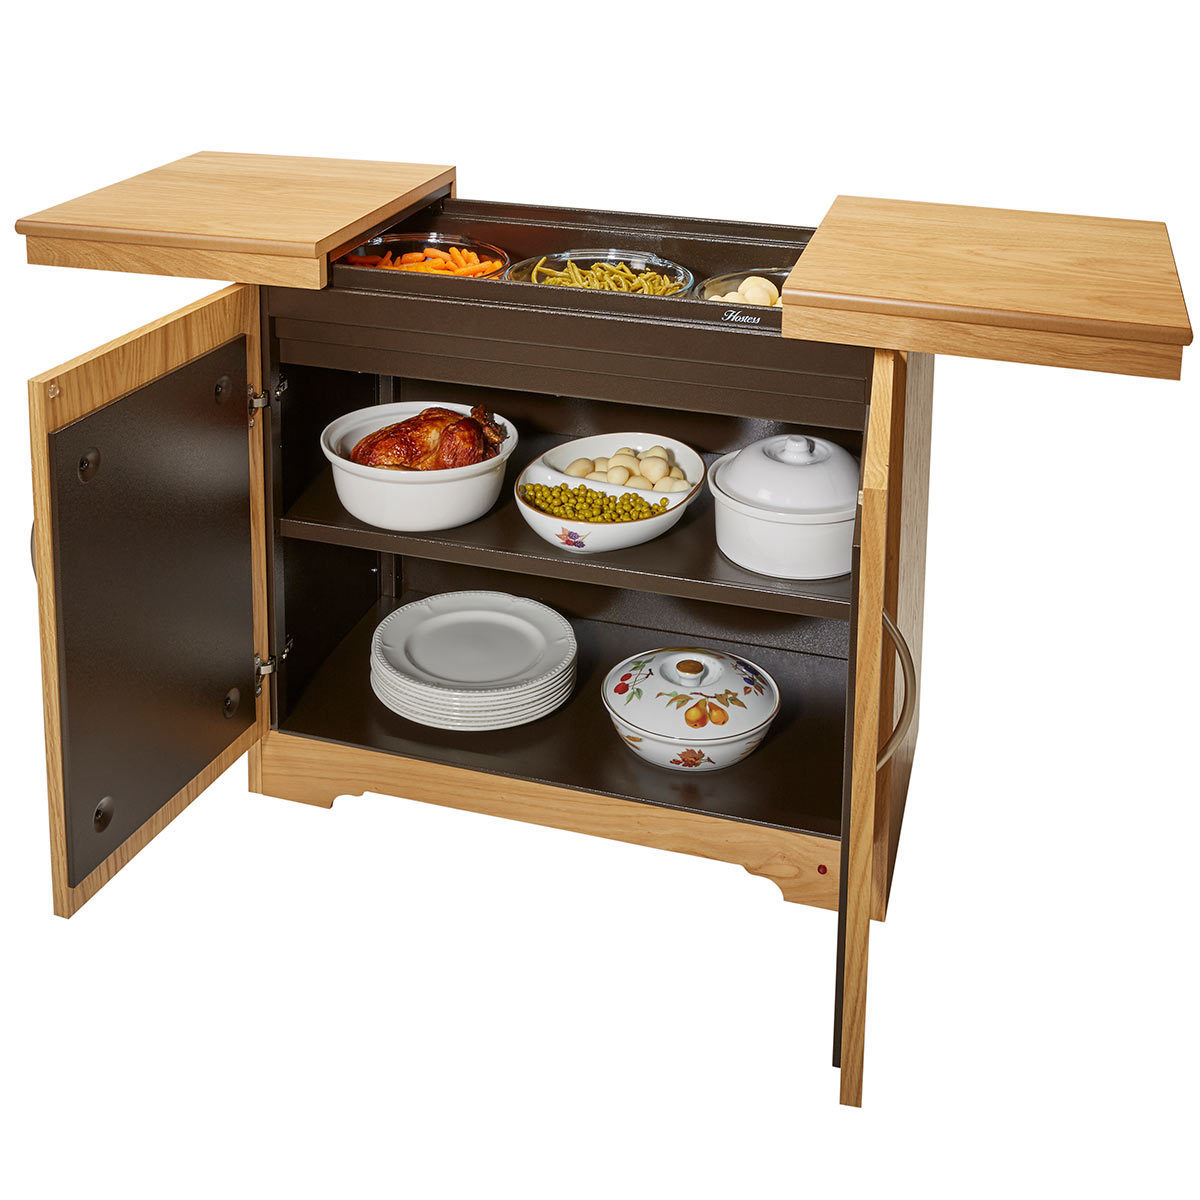 Hostess Heated Trolley with Natural Oak Veneer Finish, HL6244NO